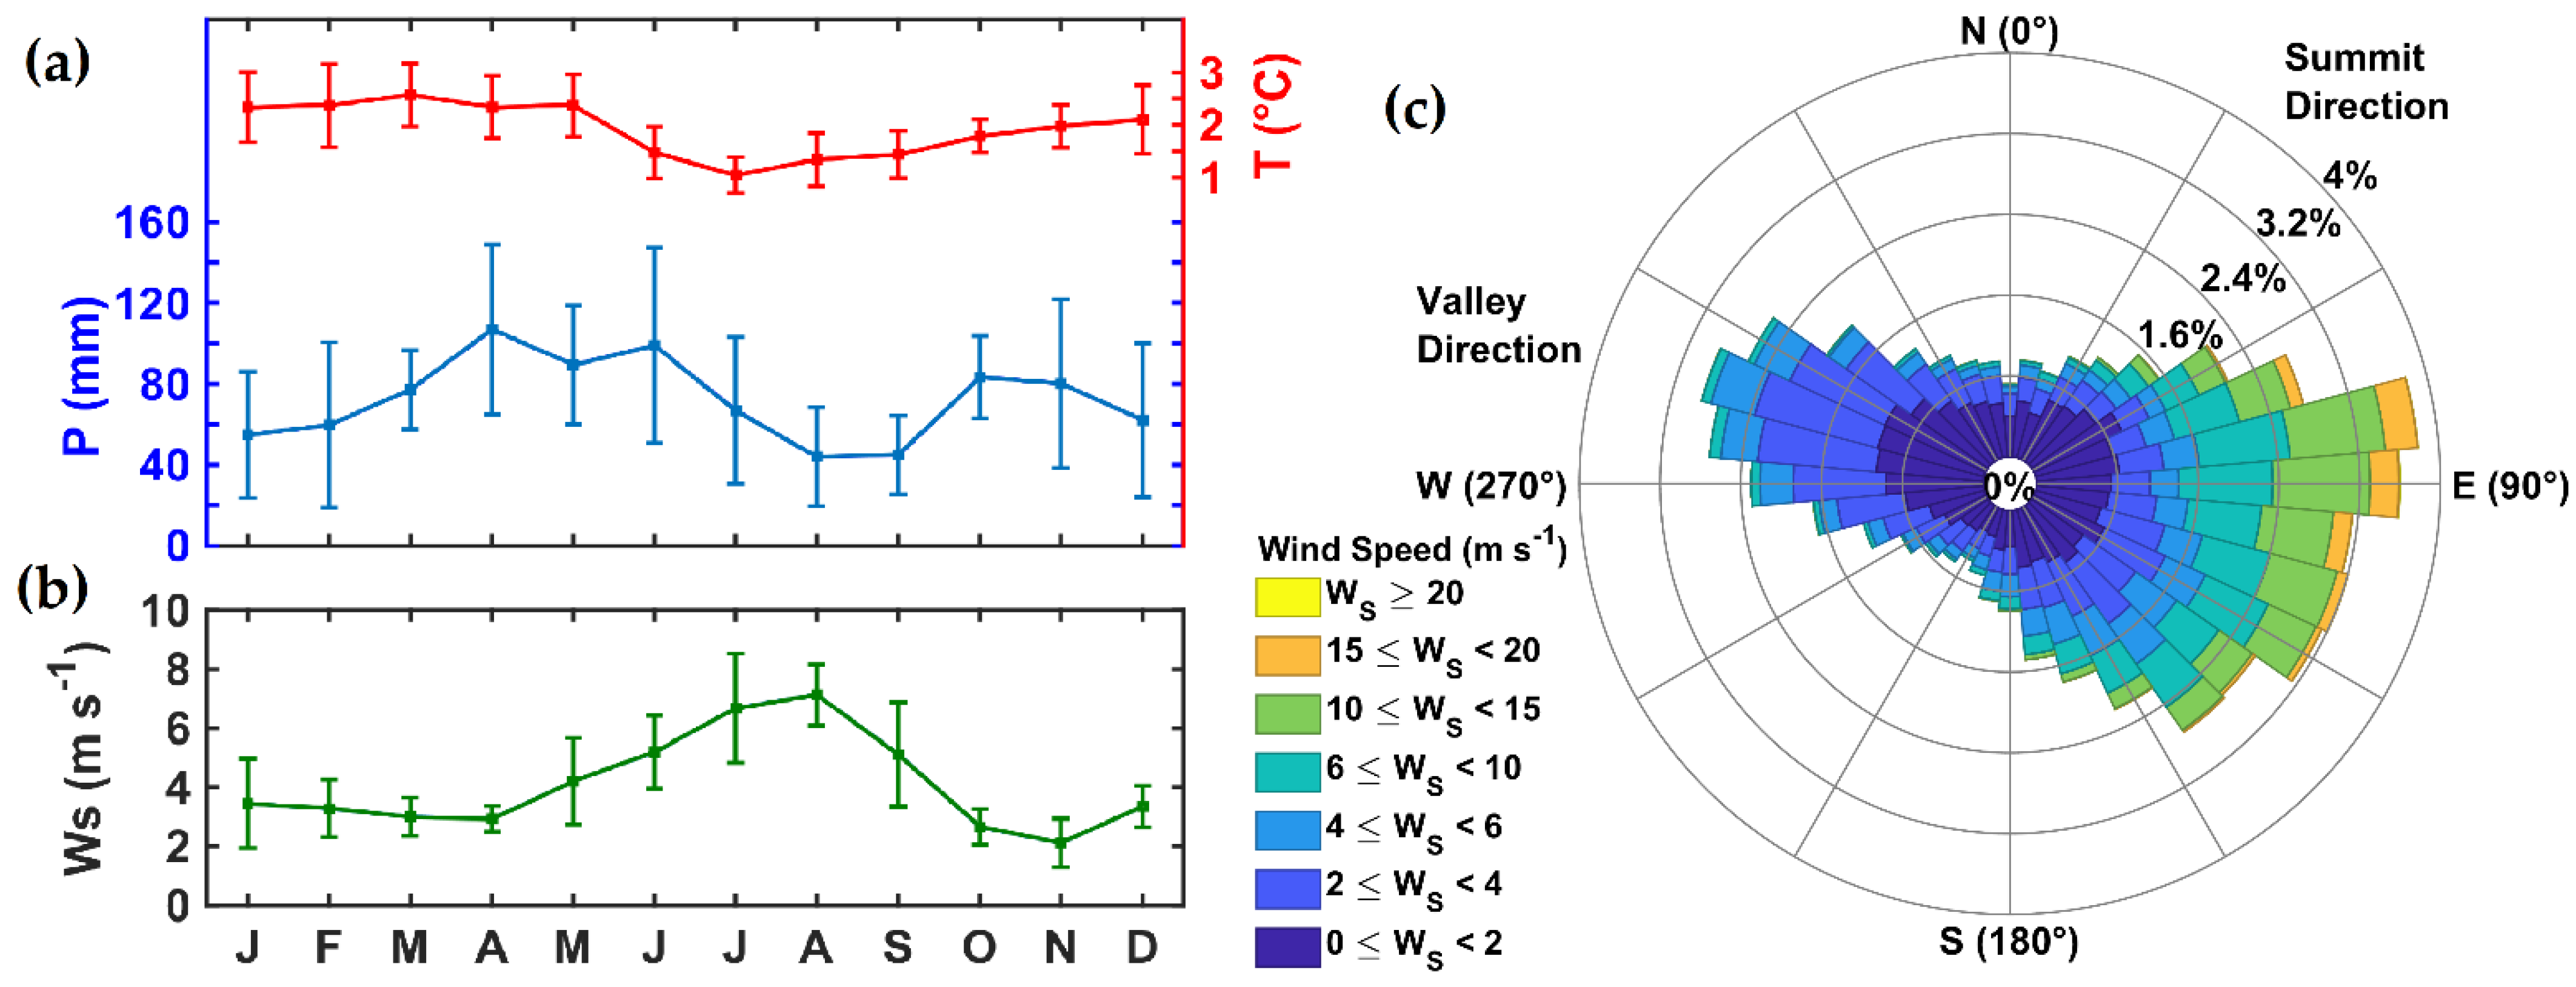 Water | Free Full-Text | Corrections of Precipitation Particle Size  Distribution Measured by a Parsivel OTT2 Disdrometer under Windy Conditions  in the Antisana Massif, Ecuador